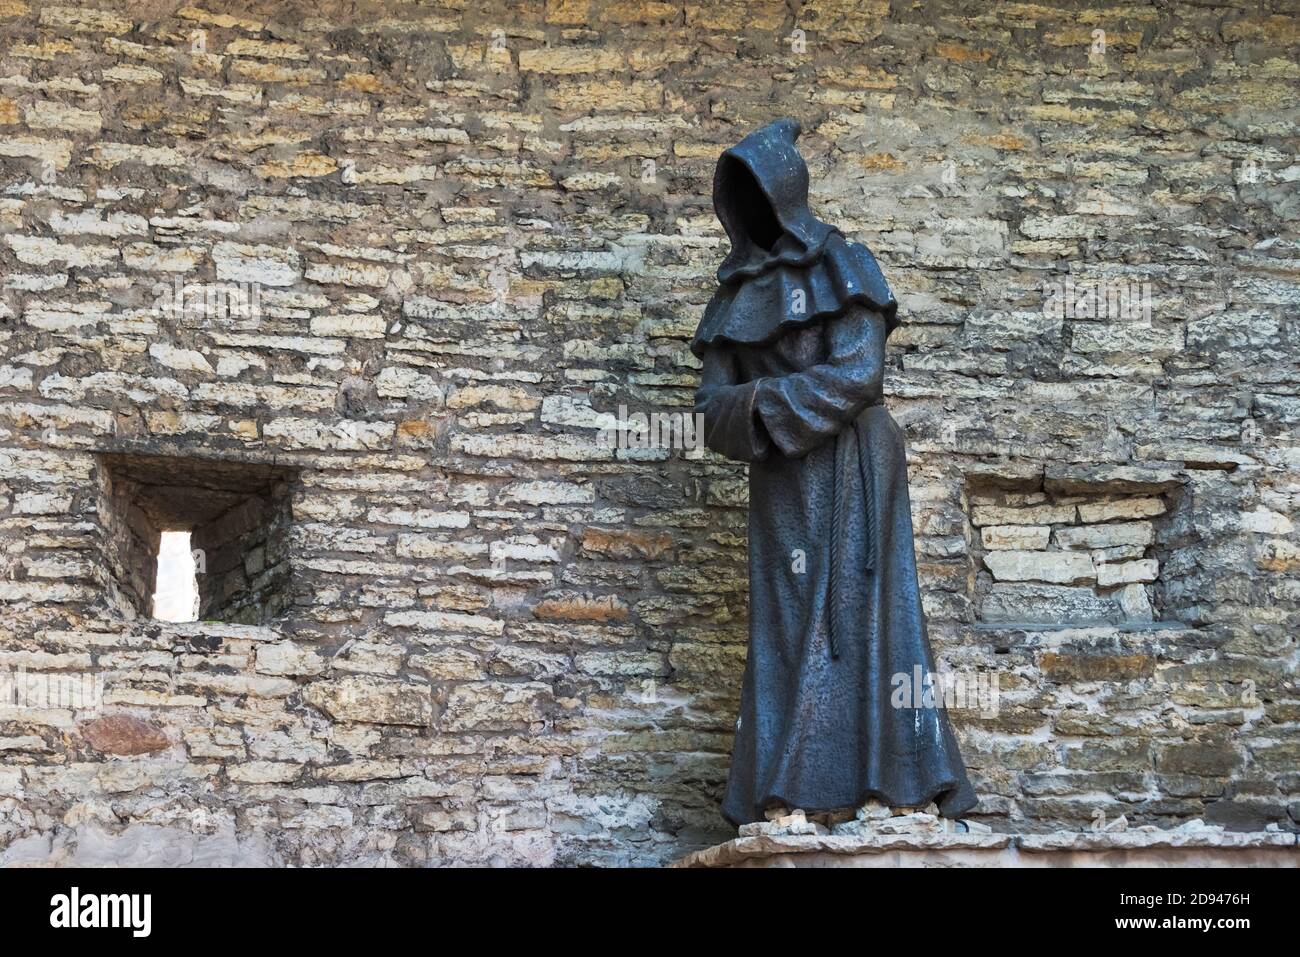 Faceless monk statue by the medieval city wall in the old town, Tallinn, Estonia Stock Photo